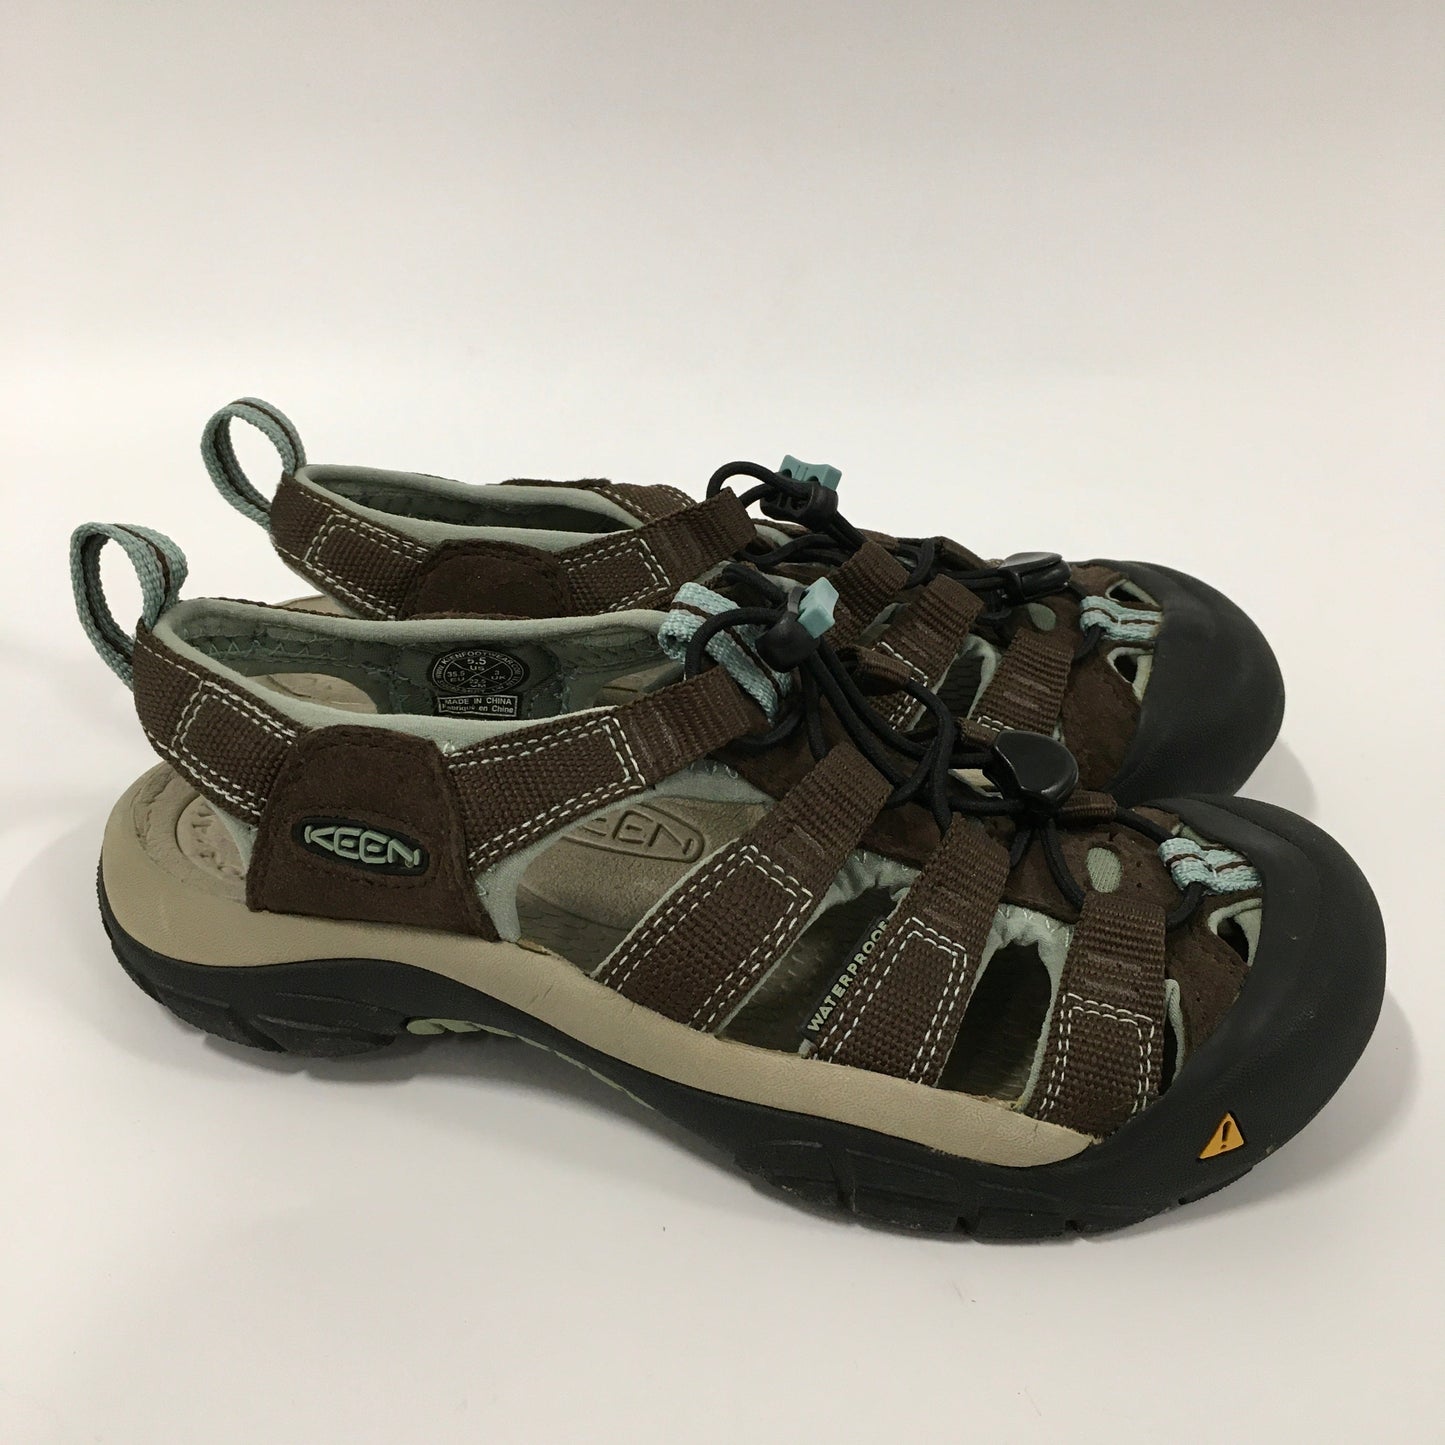 Sandals Flats By Keen  Size: 5.5